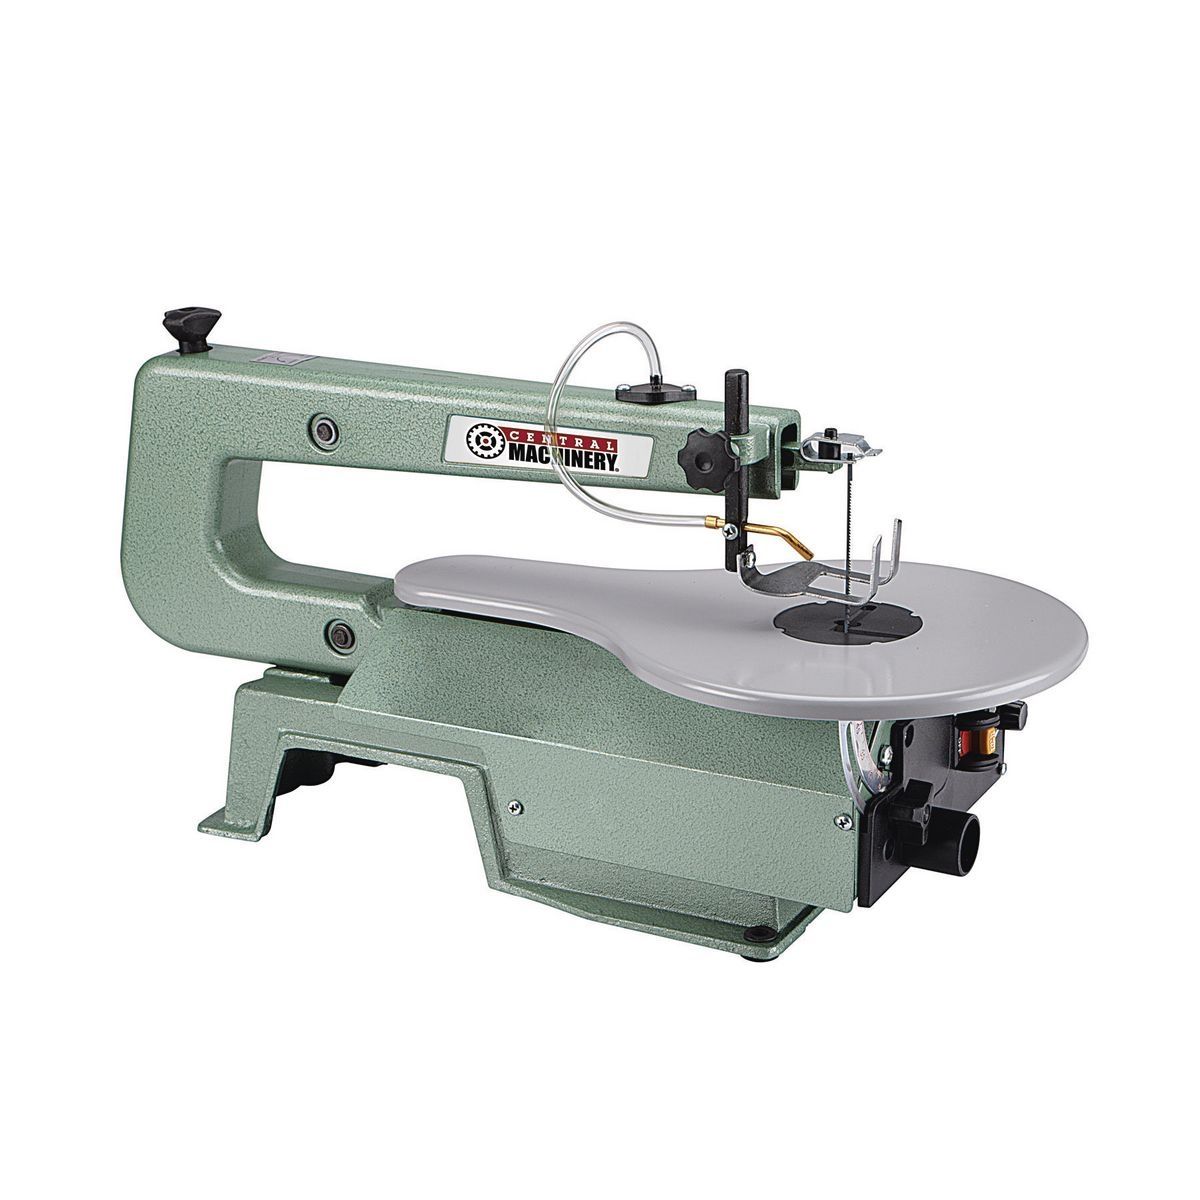 CENTRAL MACHINERY 16 in. Variable Speed Scroll Saw